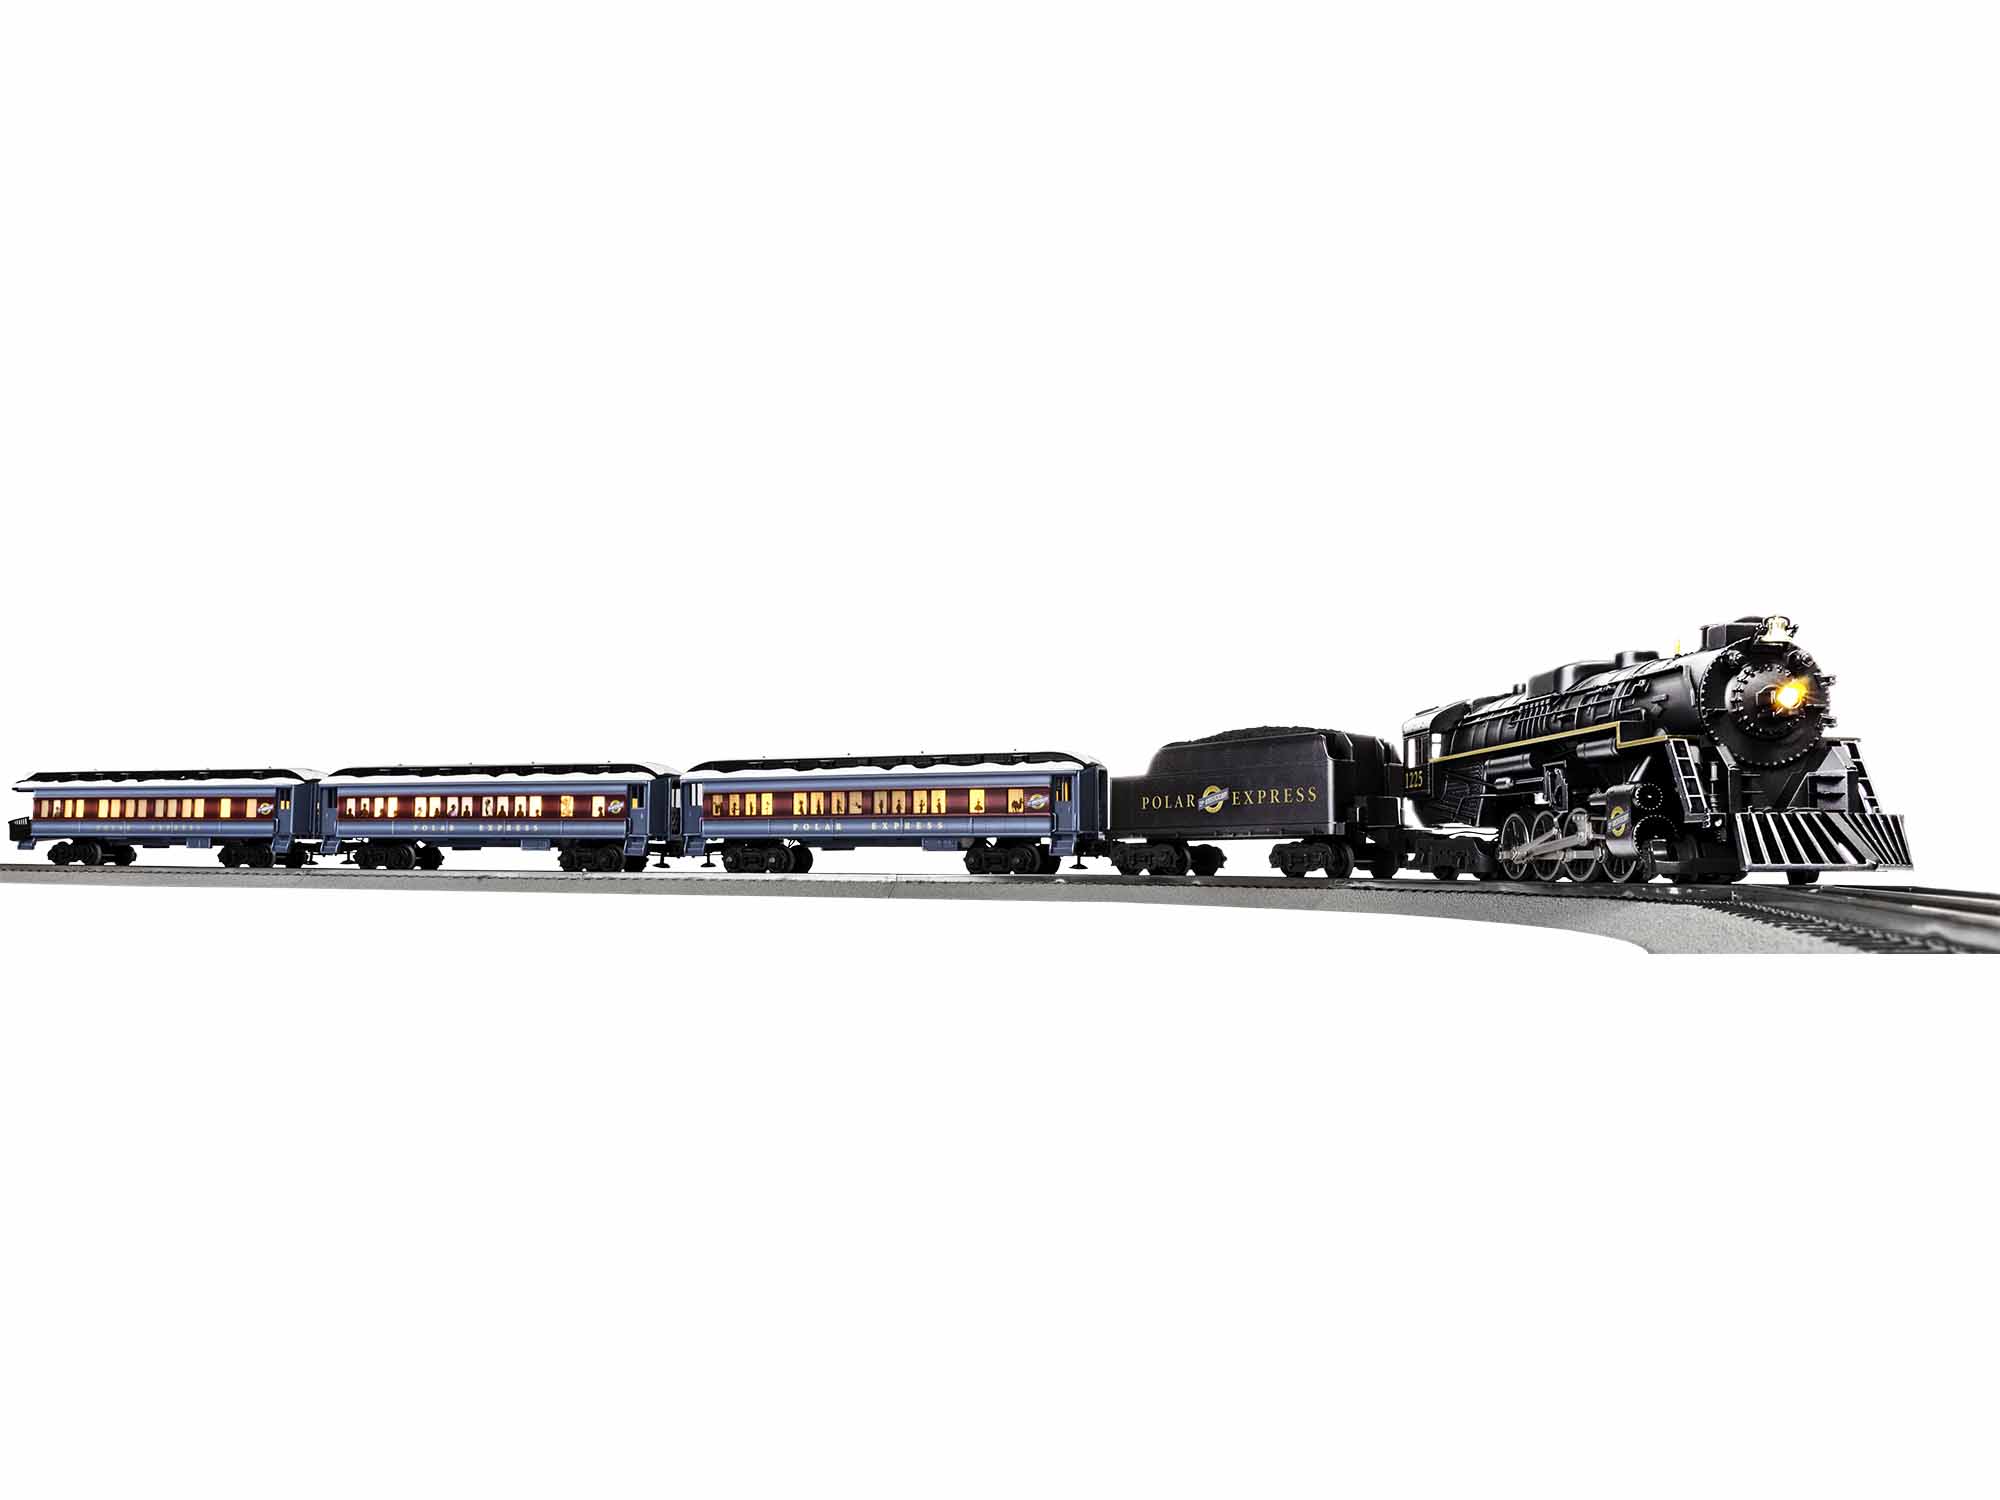 NIB SHIP FROM STORE Lionel The Polar Express Ready To Play Train Set 7-11824 